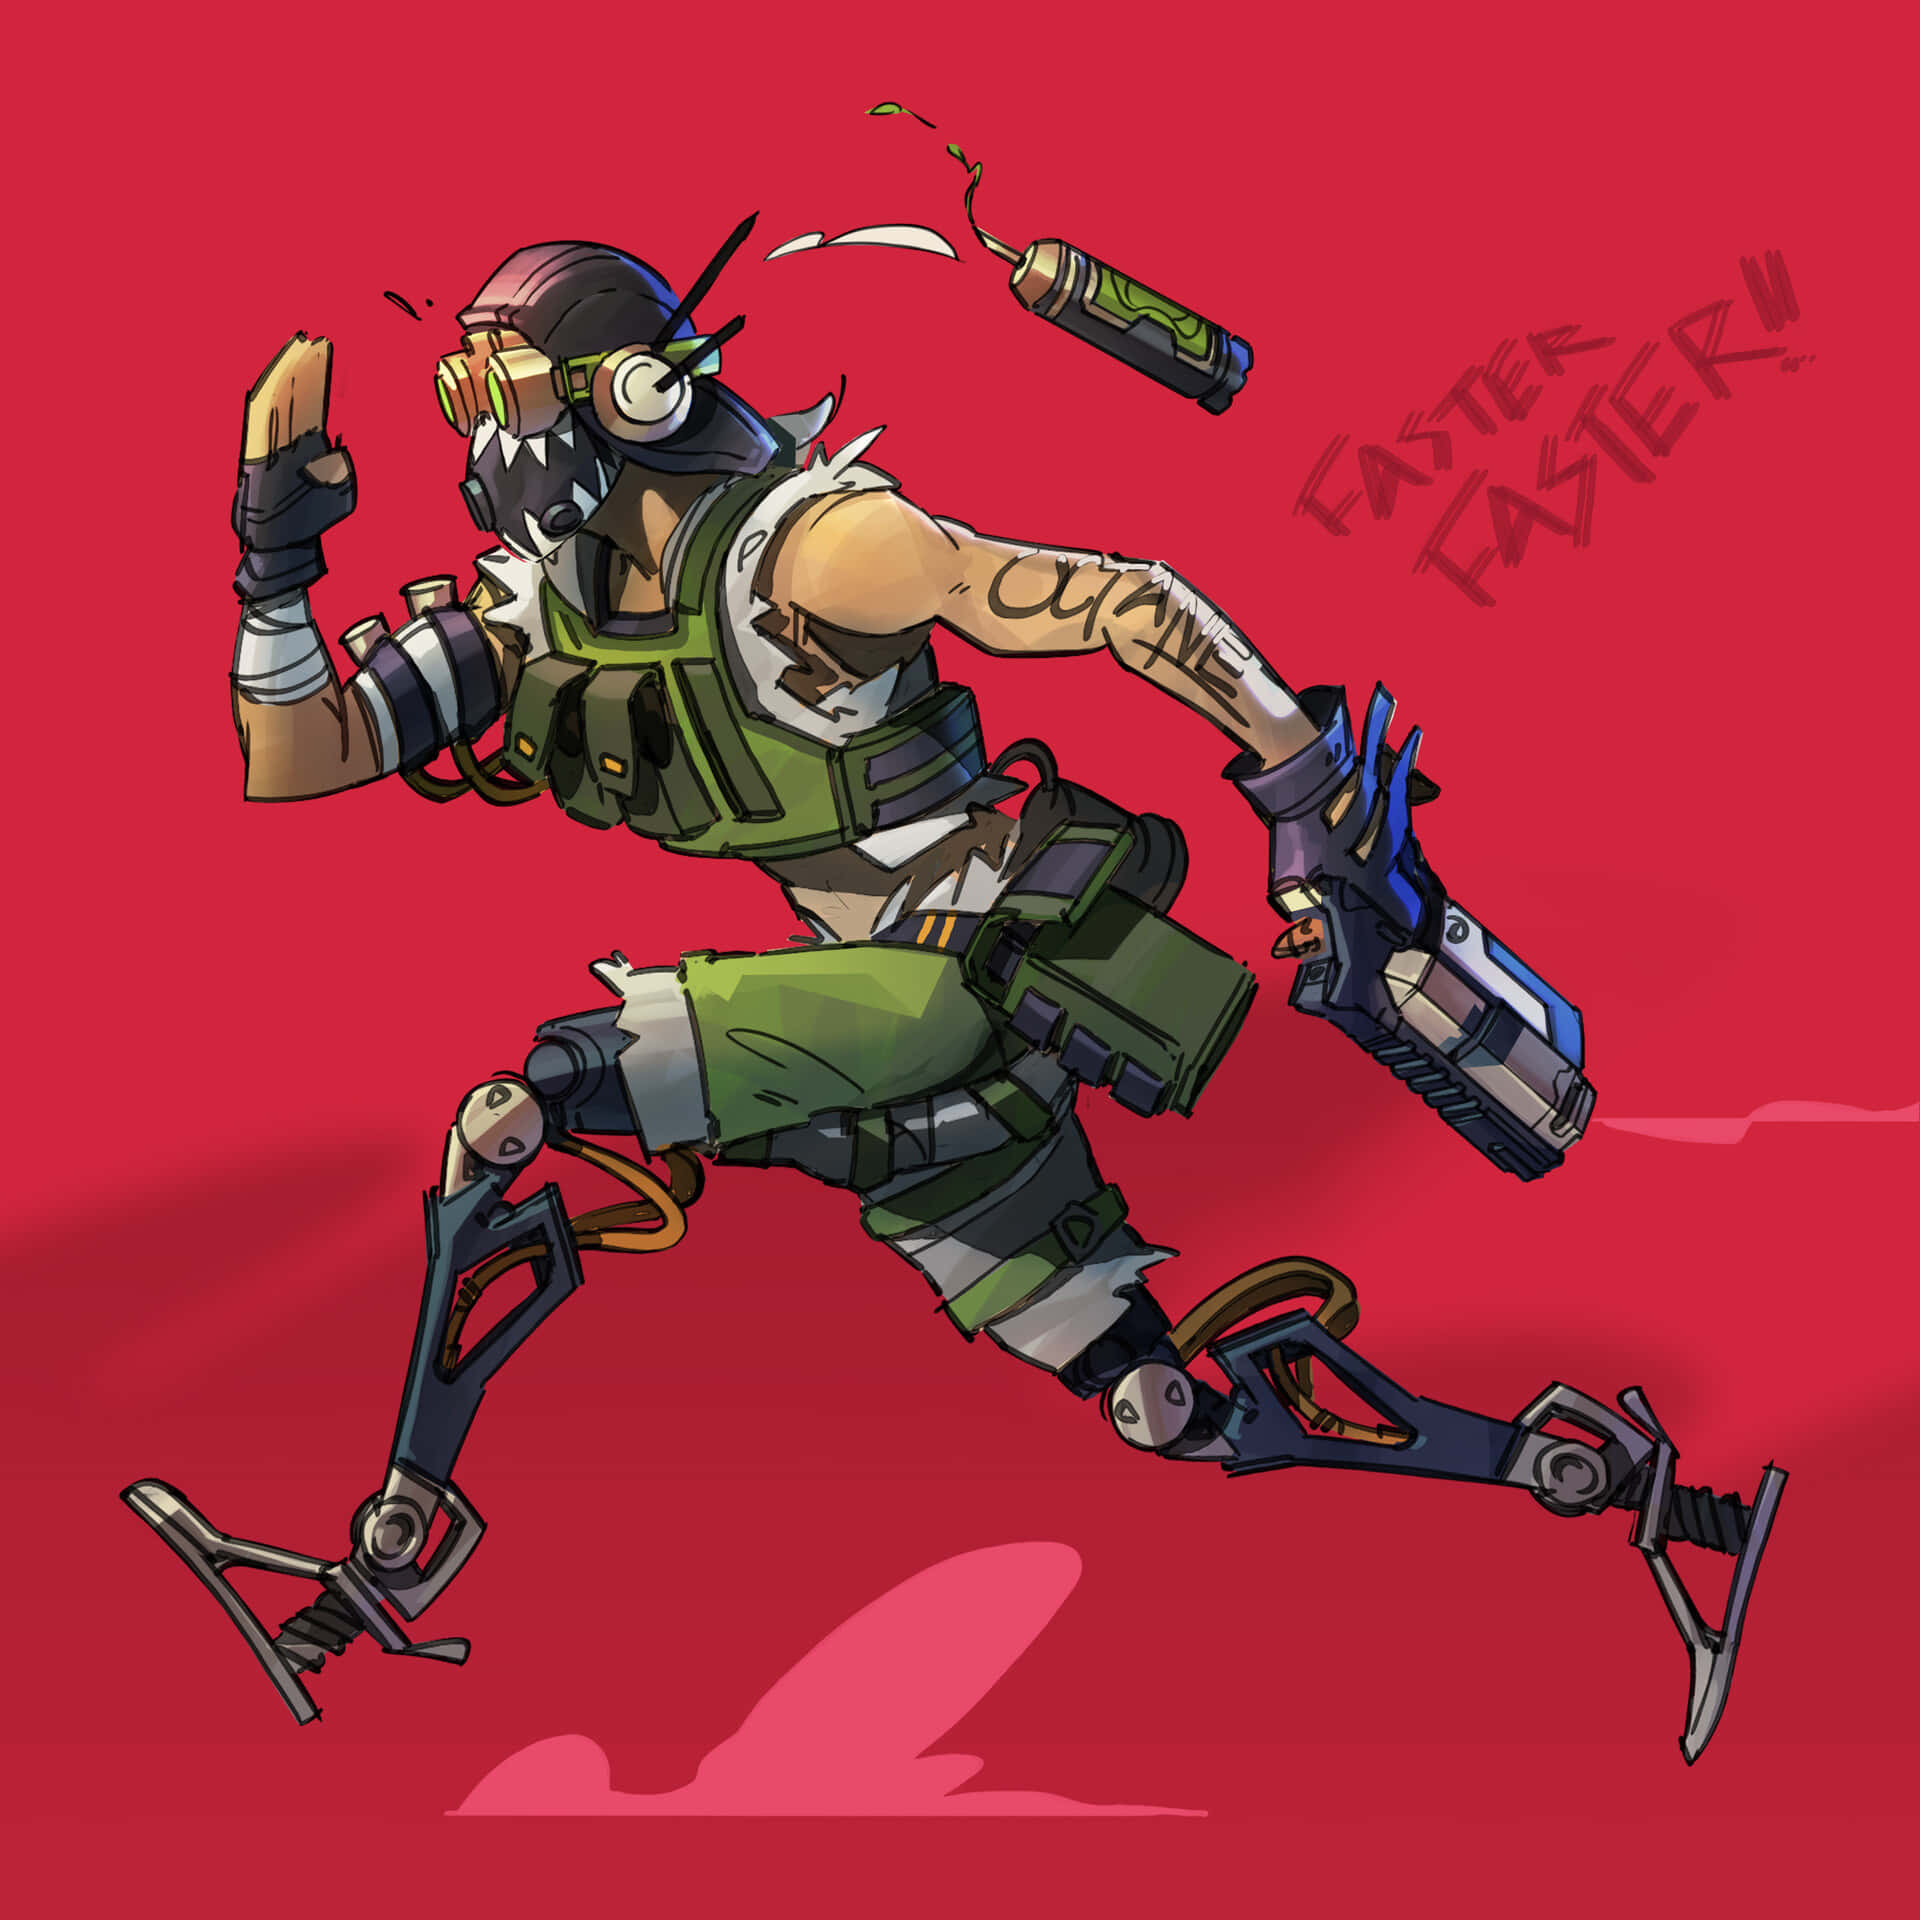 Exciting Apex Legends Fan Art Featuring Favorite Characters Wallpaper